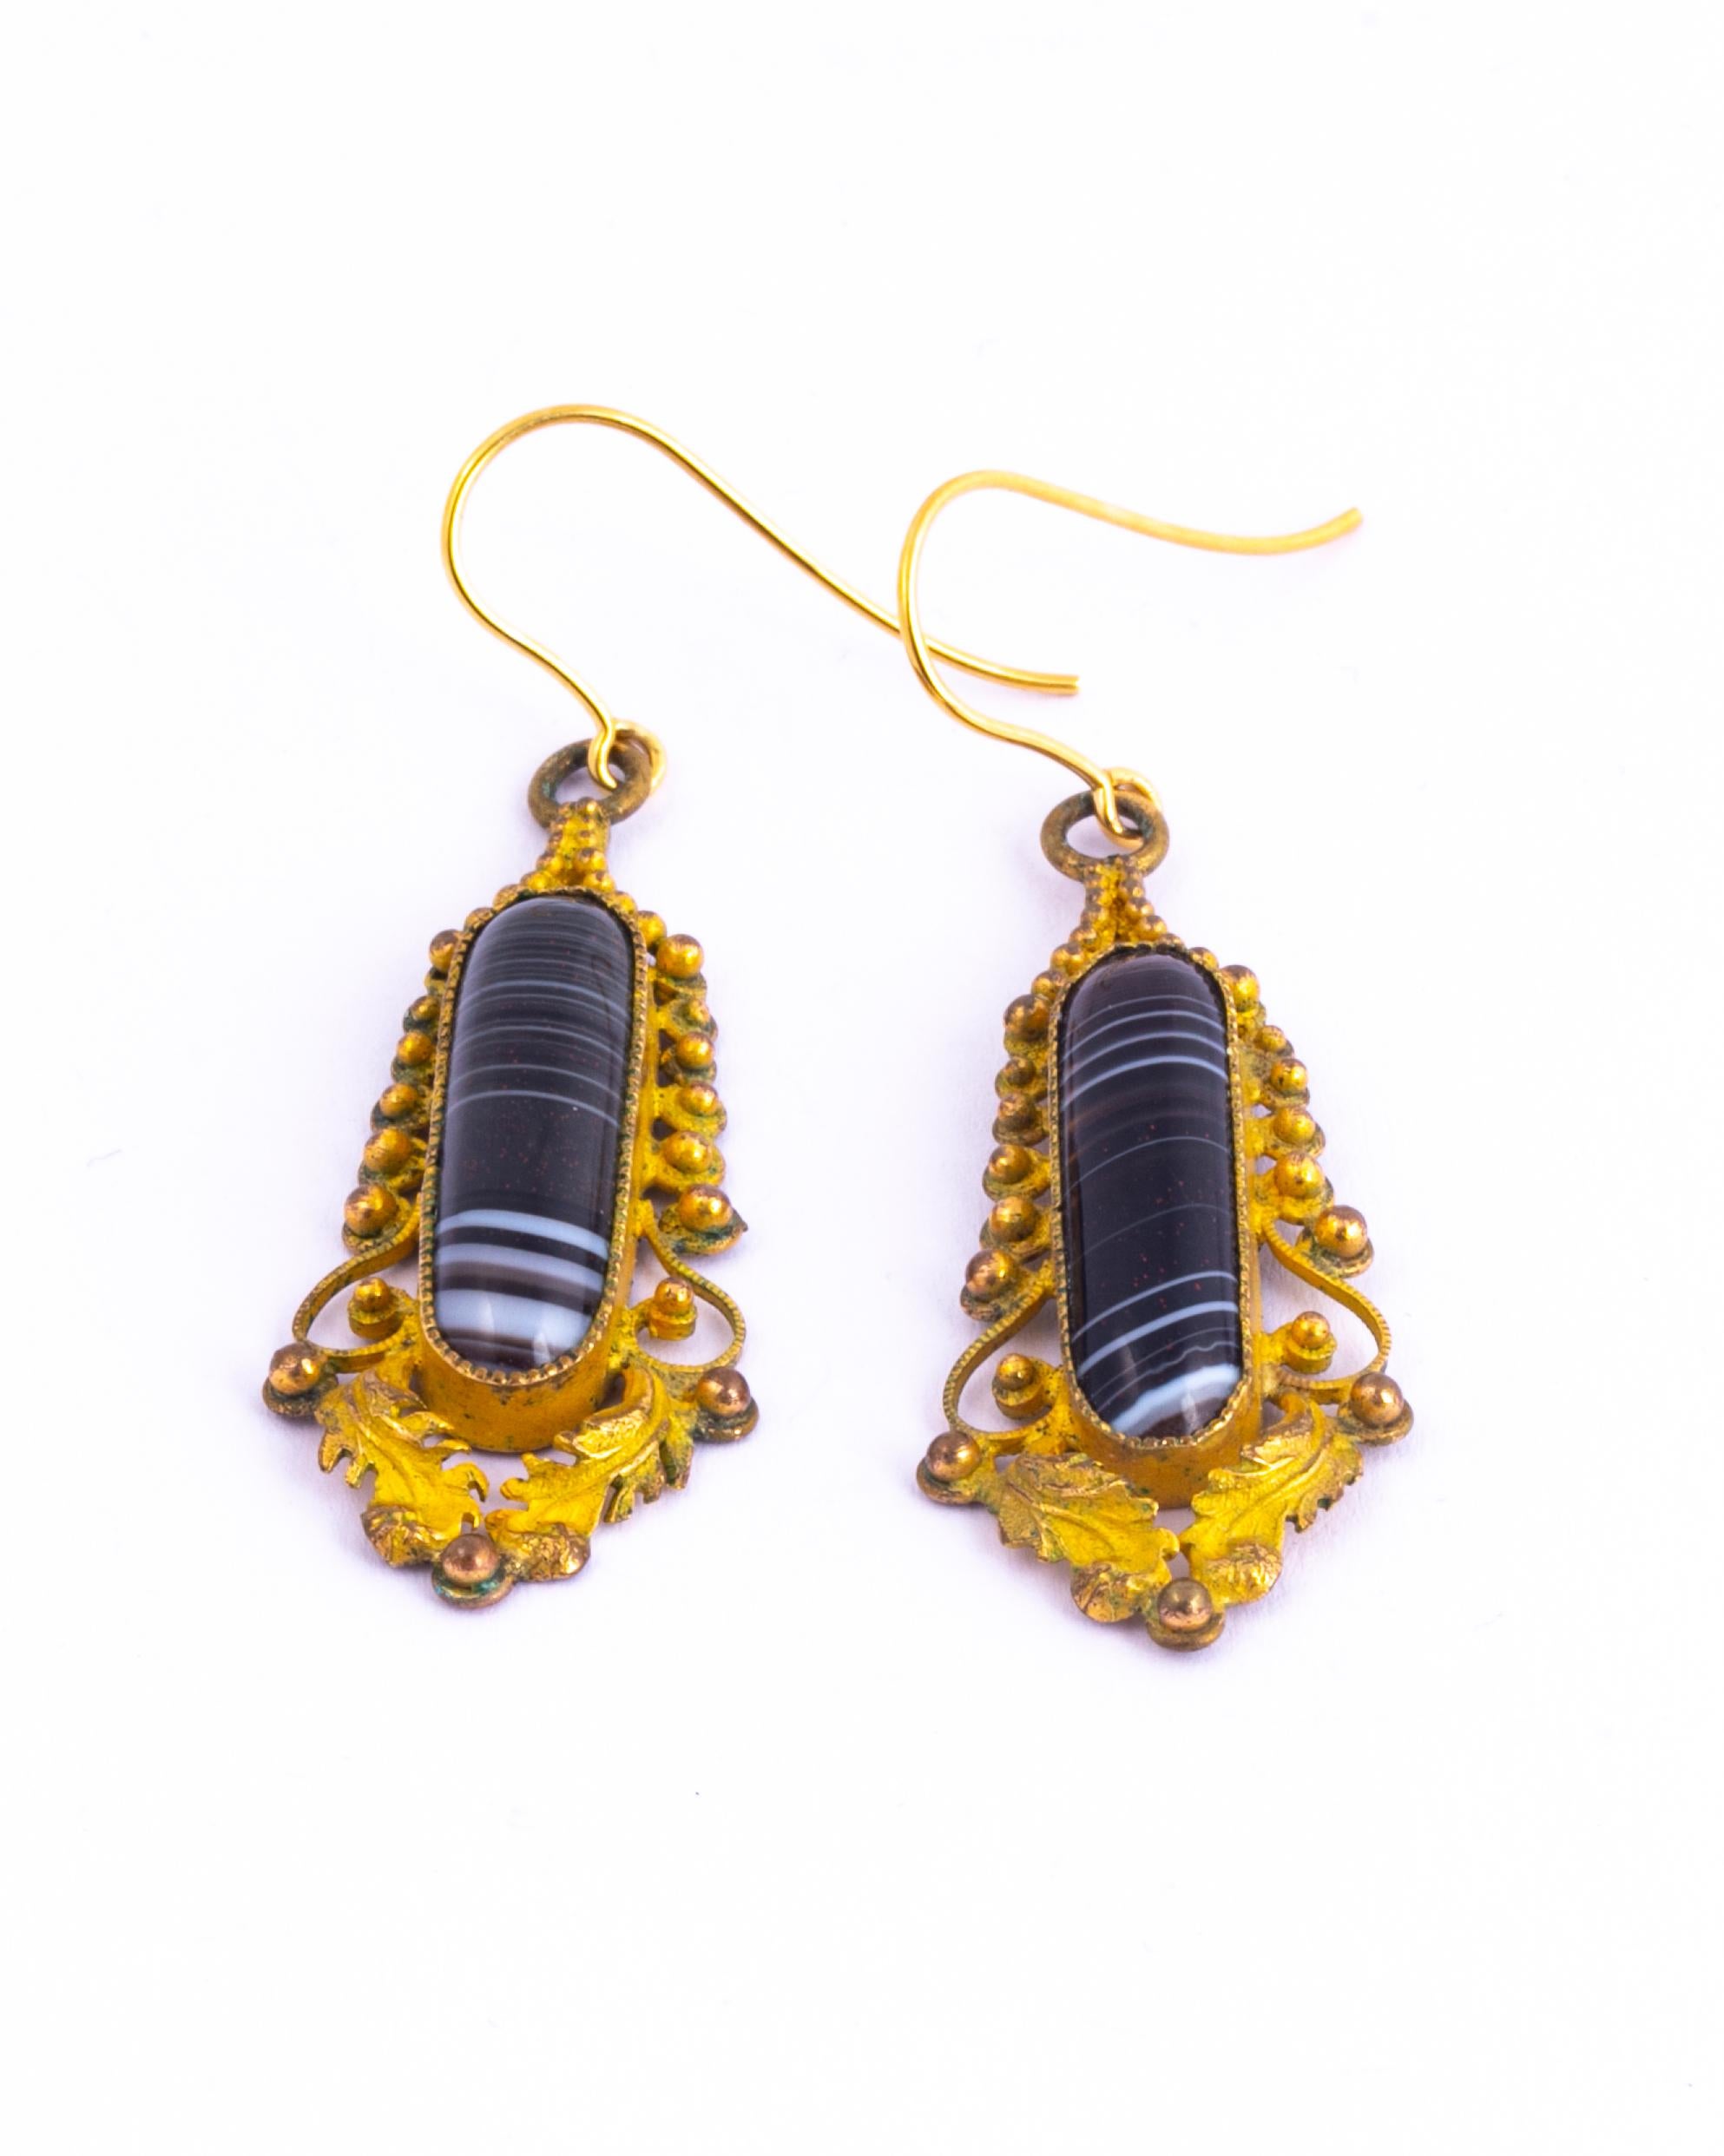 These earrings hold so much detail. The striped stones are encased in a decorative frame with leaf and orb detail. The earrings are worn using shepherds hooks.

Drop From Ear: 50mm 
Stone Dimensions: 22x6mm

Weight: 4.6